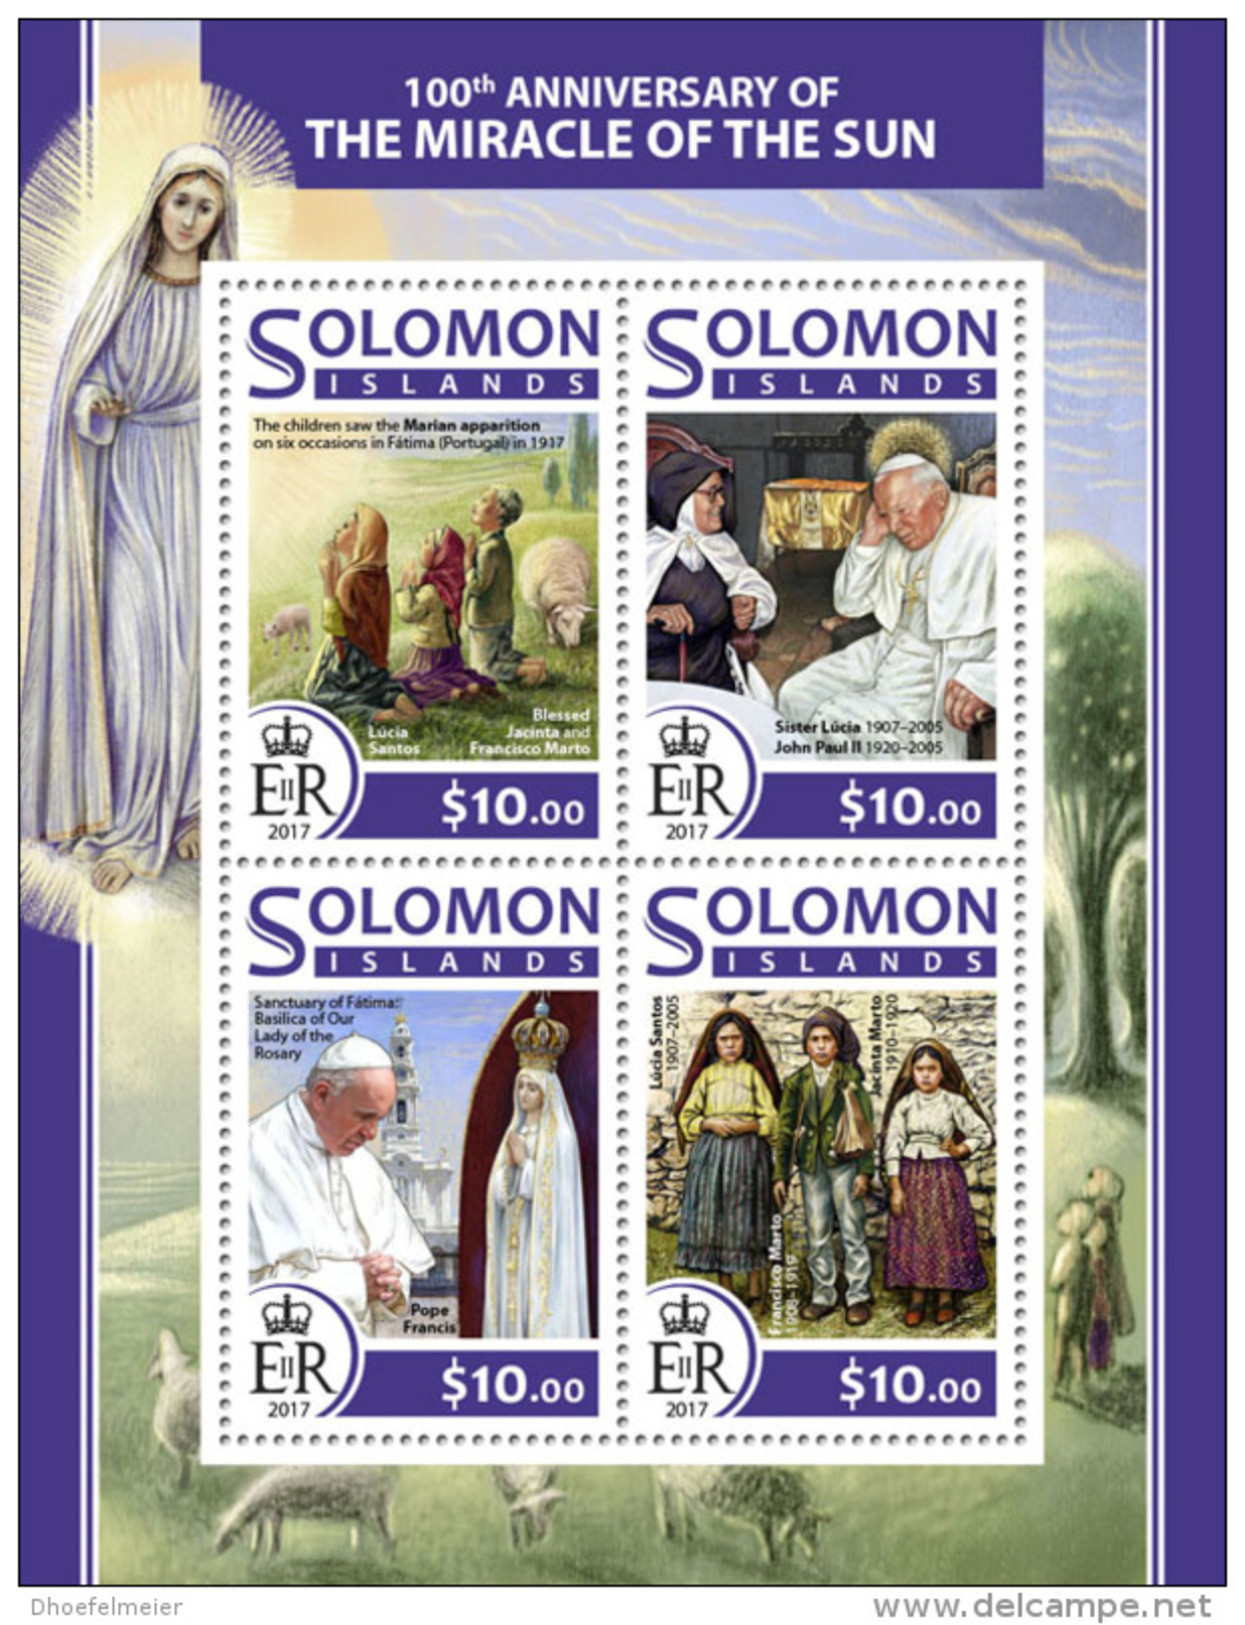 SOLOMON ISLANDS 2017 ** Miracle Of The Sun Sonnenwunder Fatima Miracle Du Soleil M/S - OFFICIAL ISSUE - DH1724 - Cristianismo